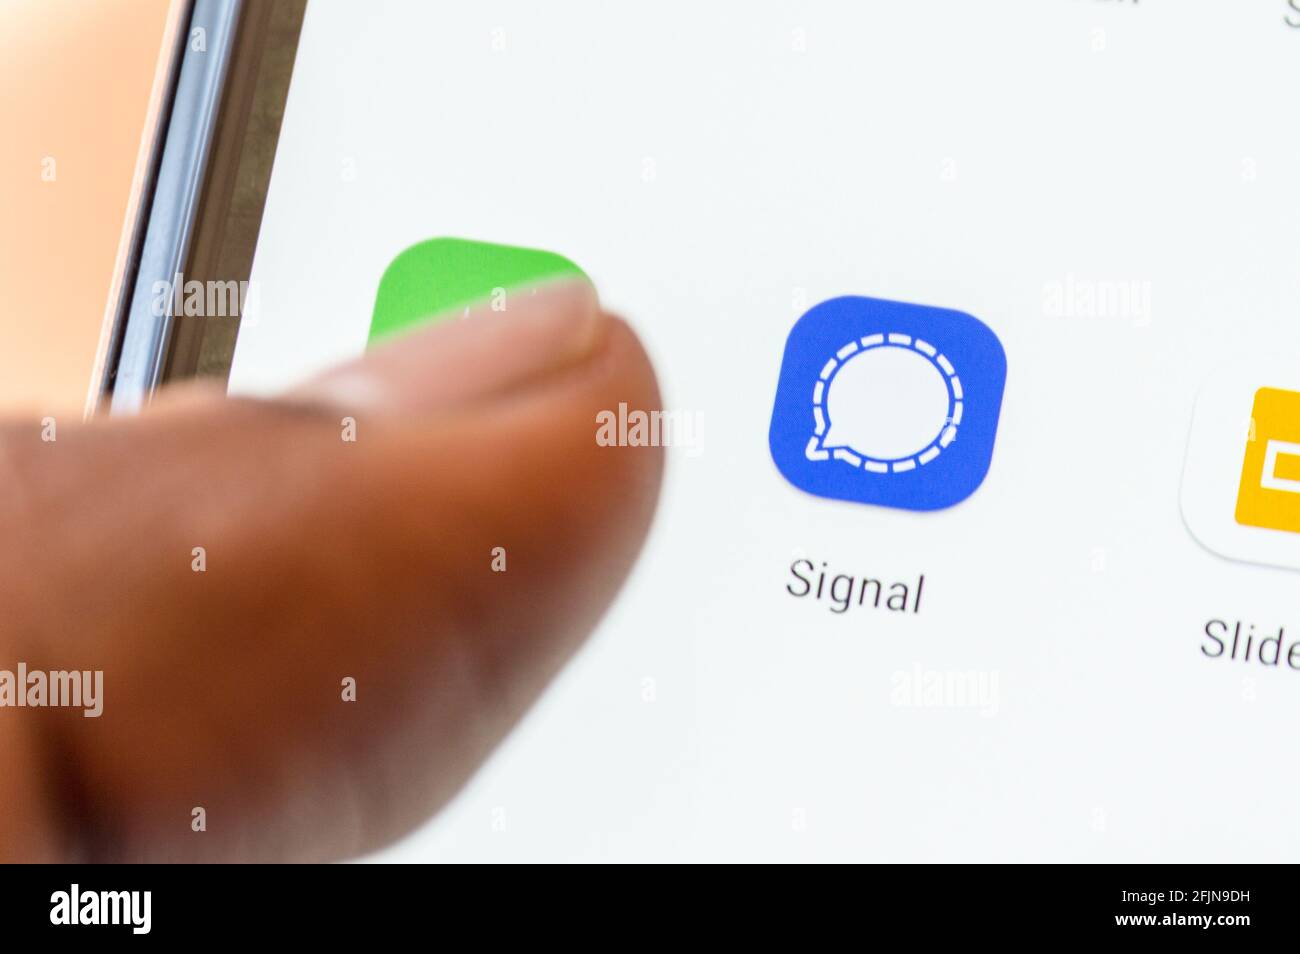 Signal end to end encryption message icon on smartphone Stock Photo